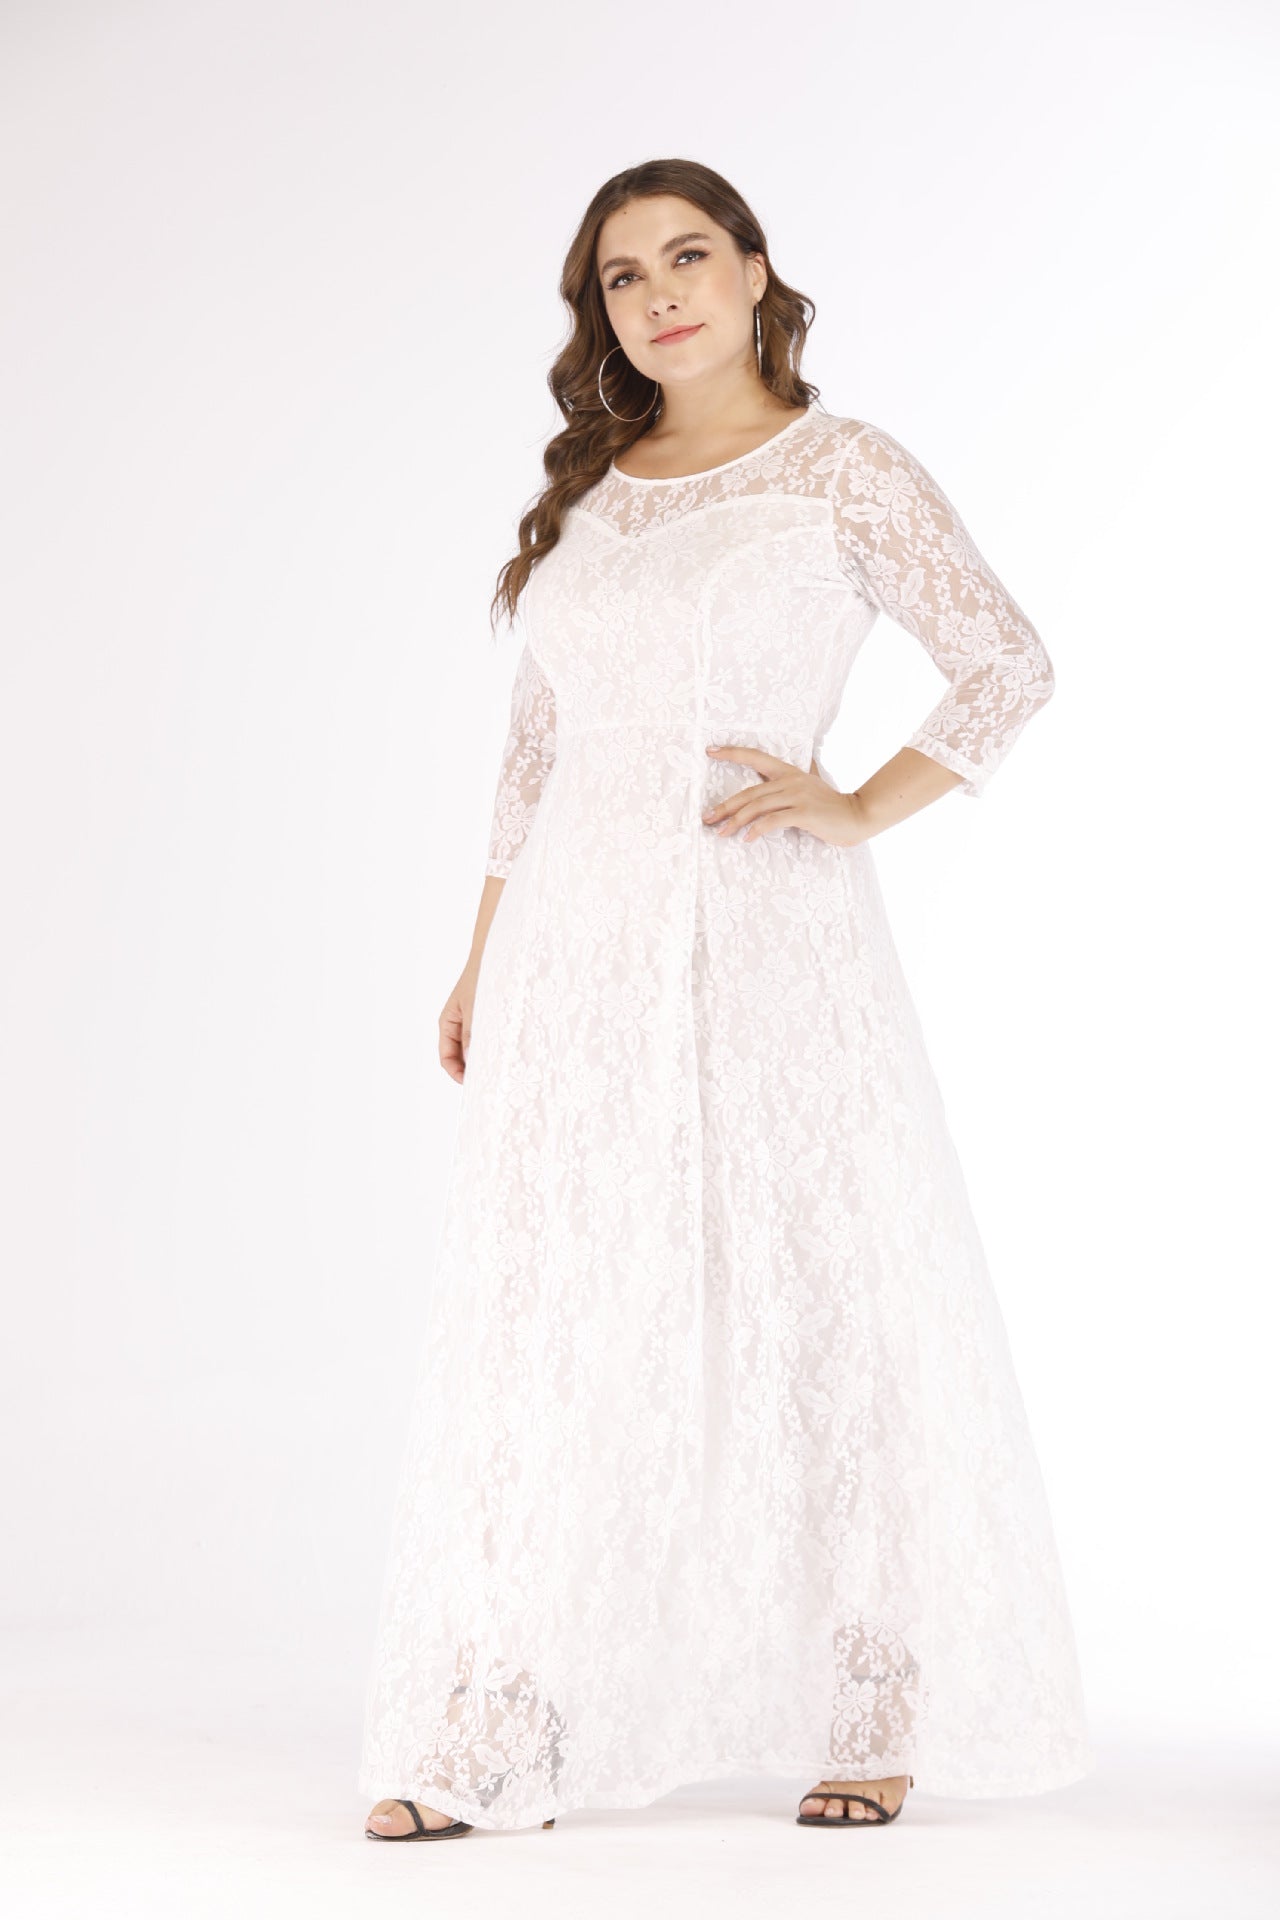 Plus Sizes Lace Evening Party Dresses for Women-Dresses-White-XL-Free Shipping at meselling99